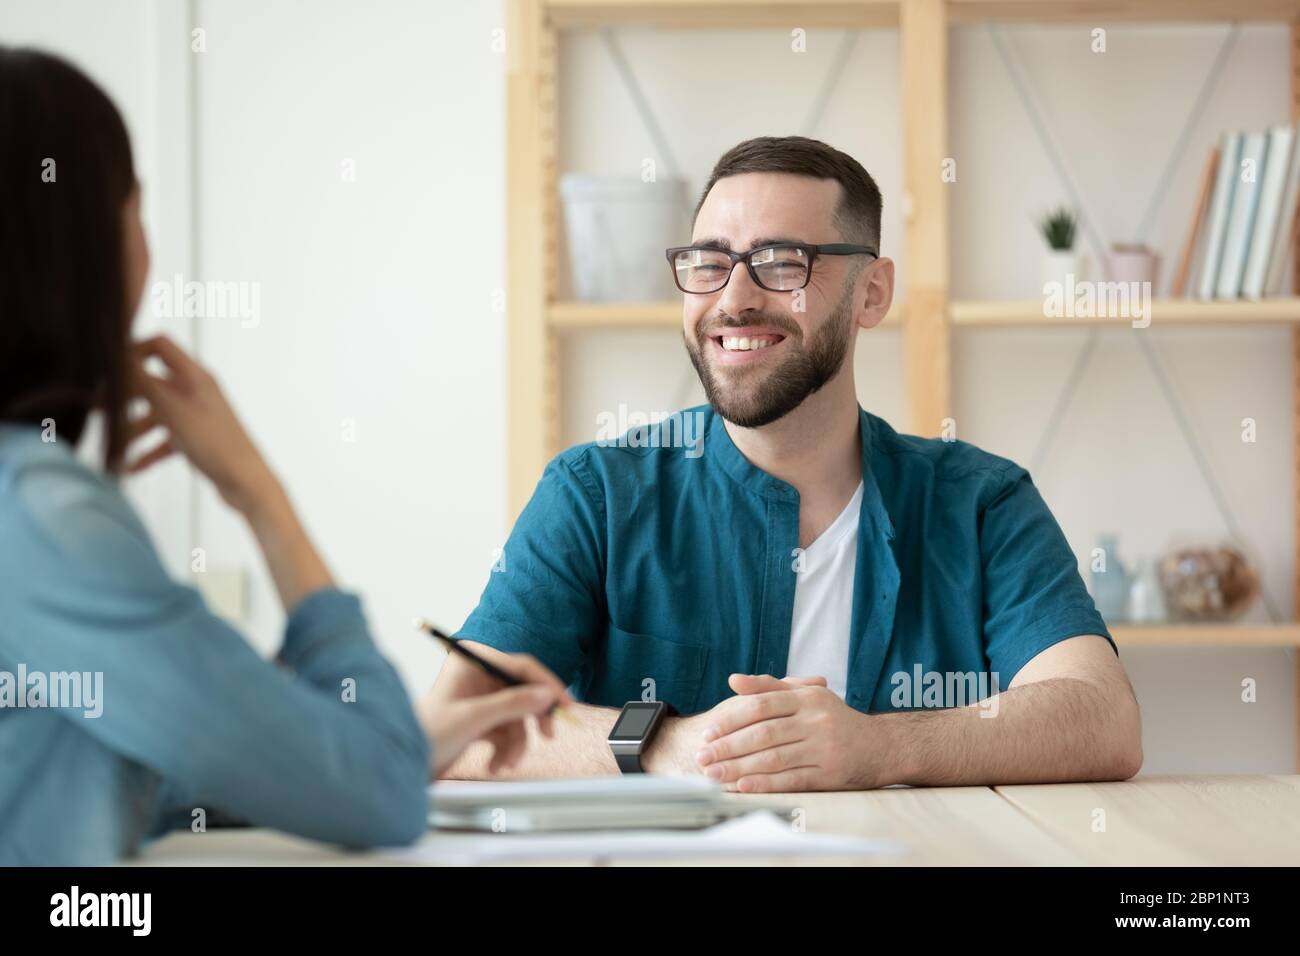 Close up happy bearded man applicant makes good first impression. Stock Photo